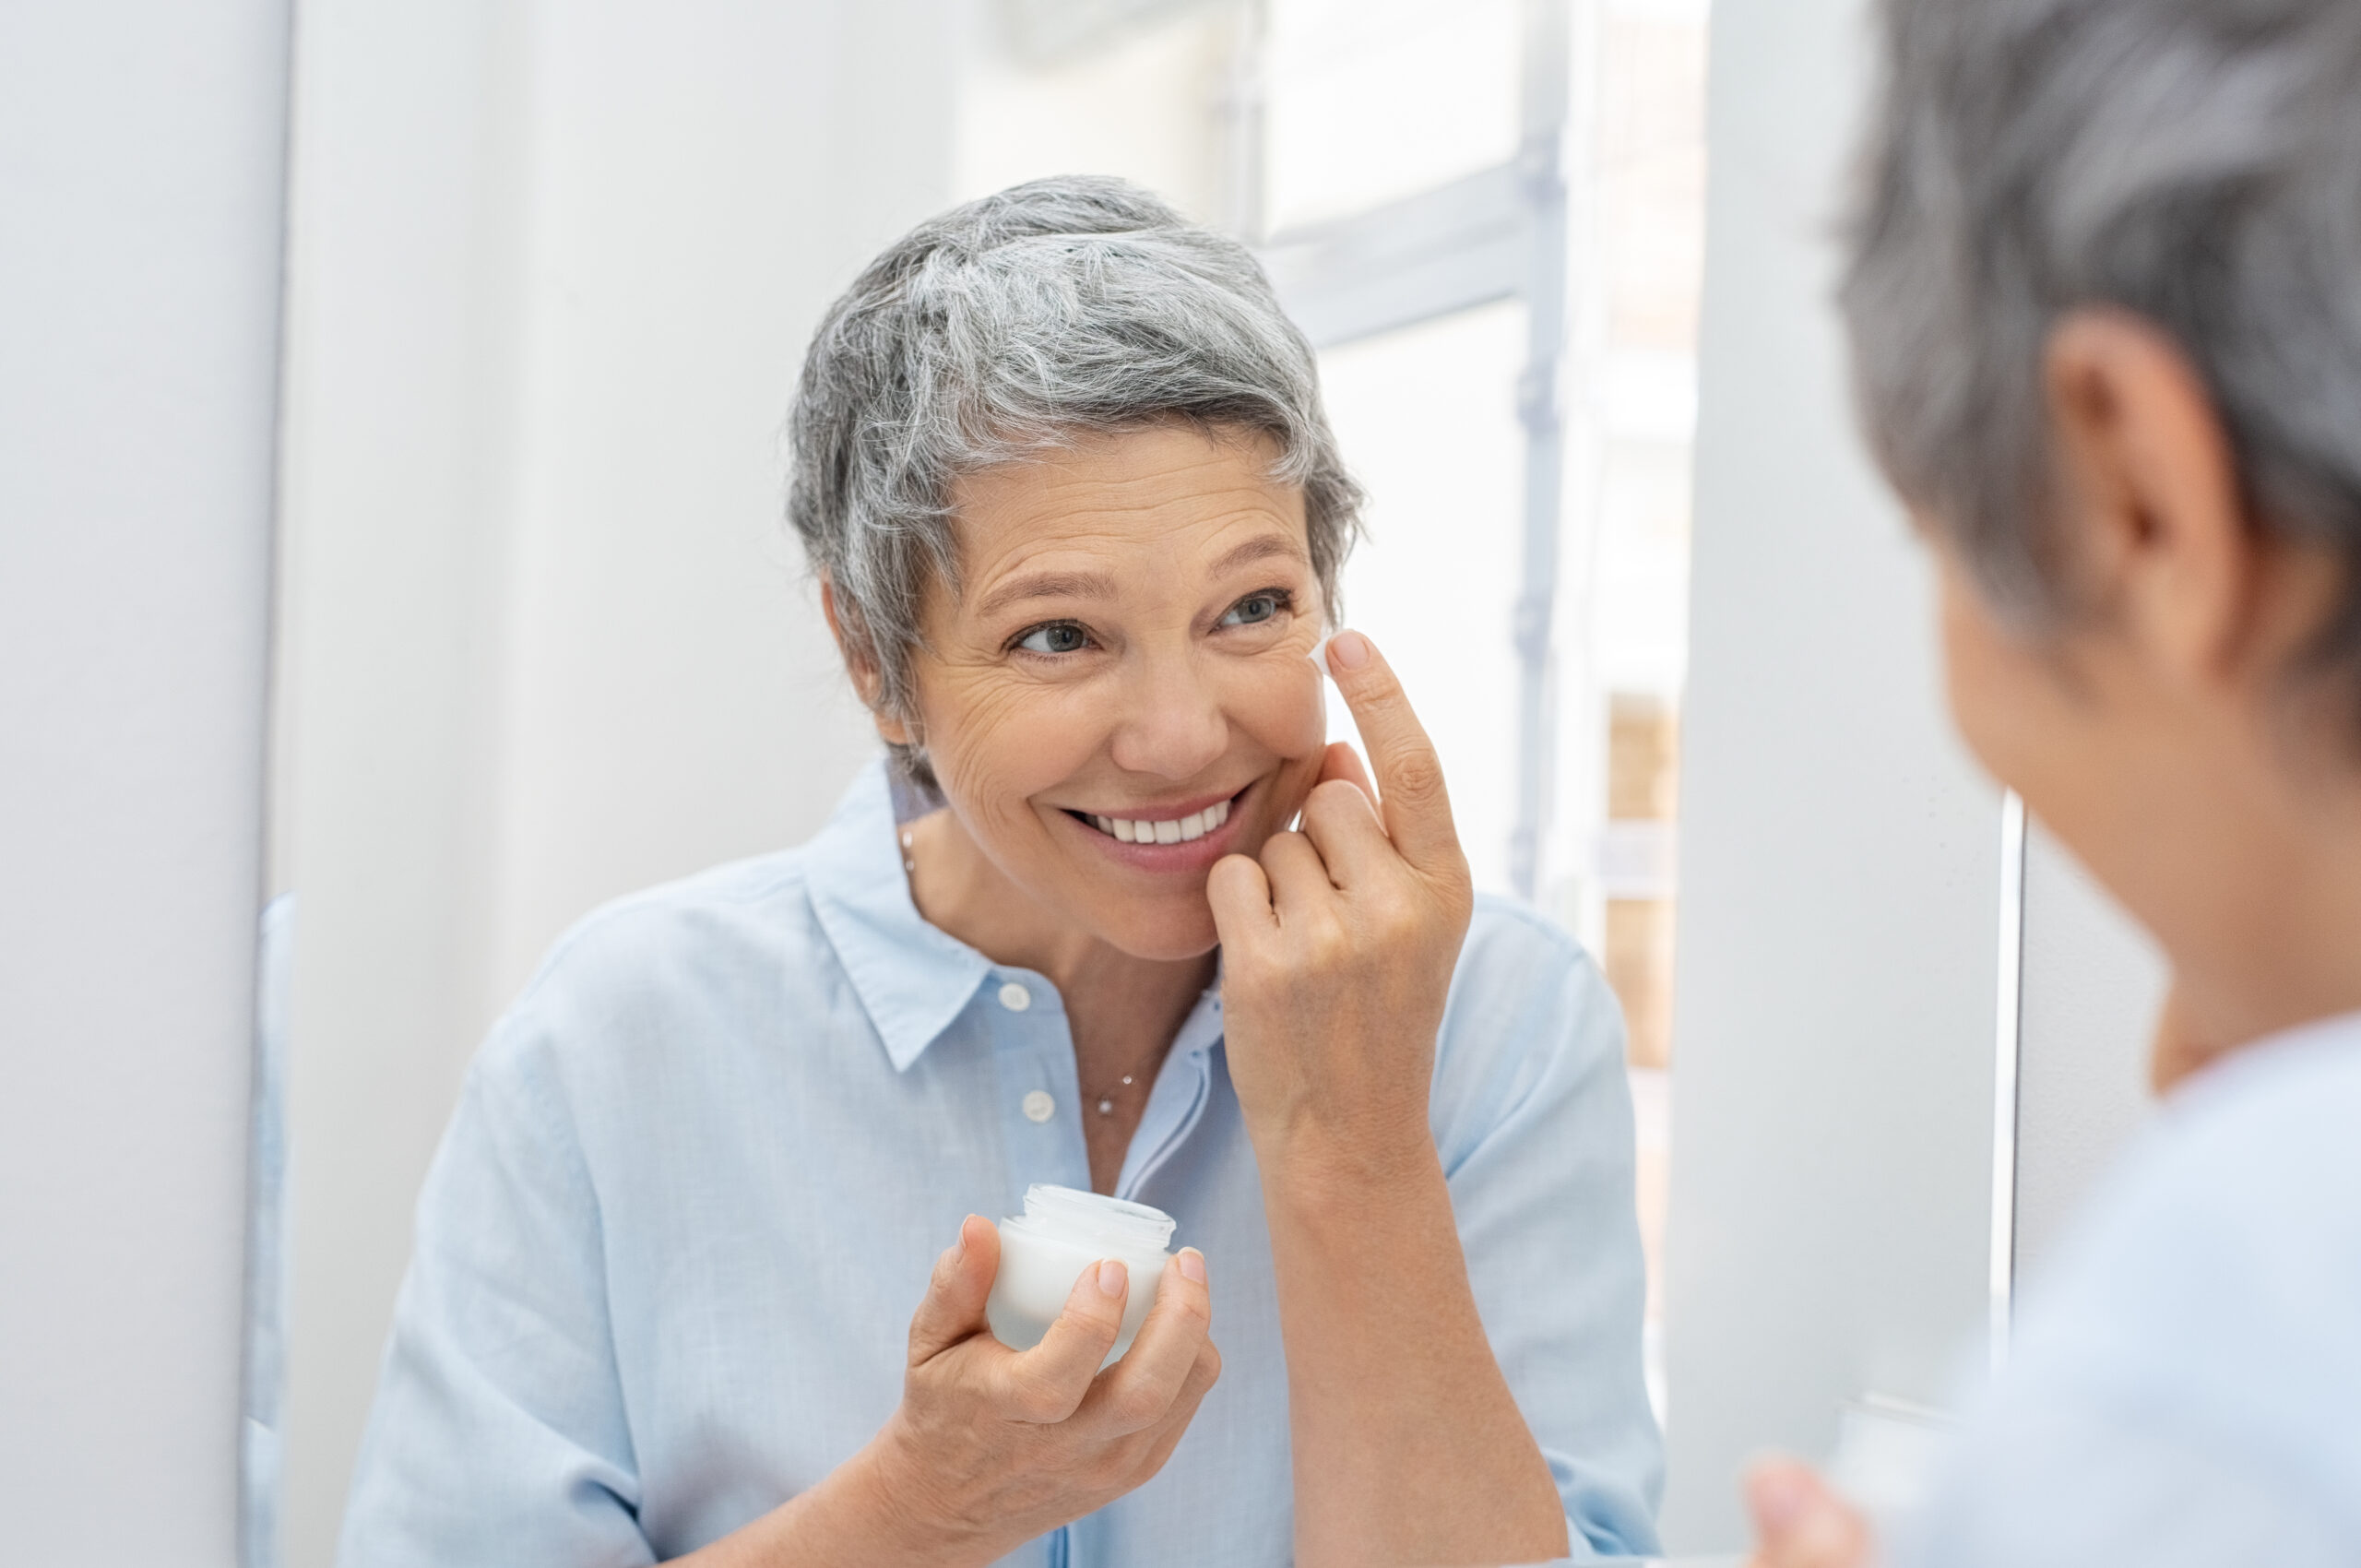 Happy mature woman applying face lotion while looking herself in the bathroom mirror. Senior woman applying anti aging moisturizer on her face. Smiling lady holding little jar of skin cream and applying lotion during the morning routine.